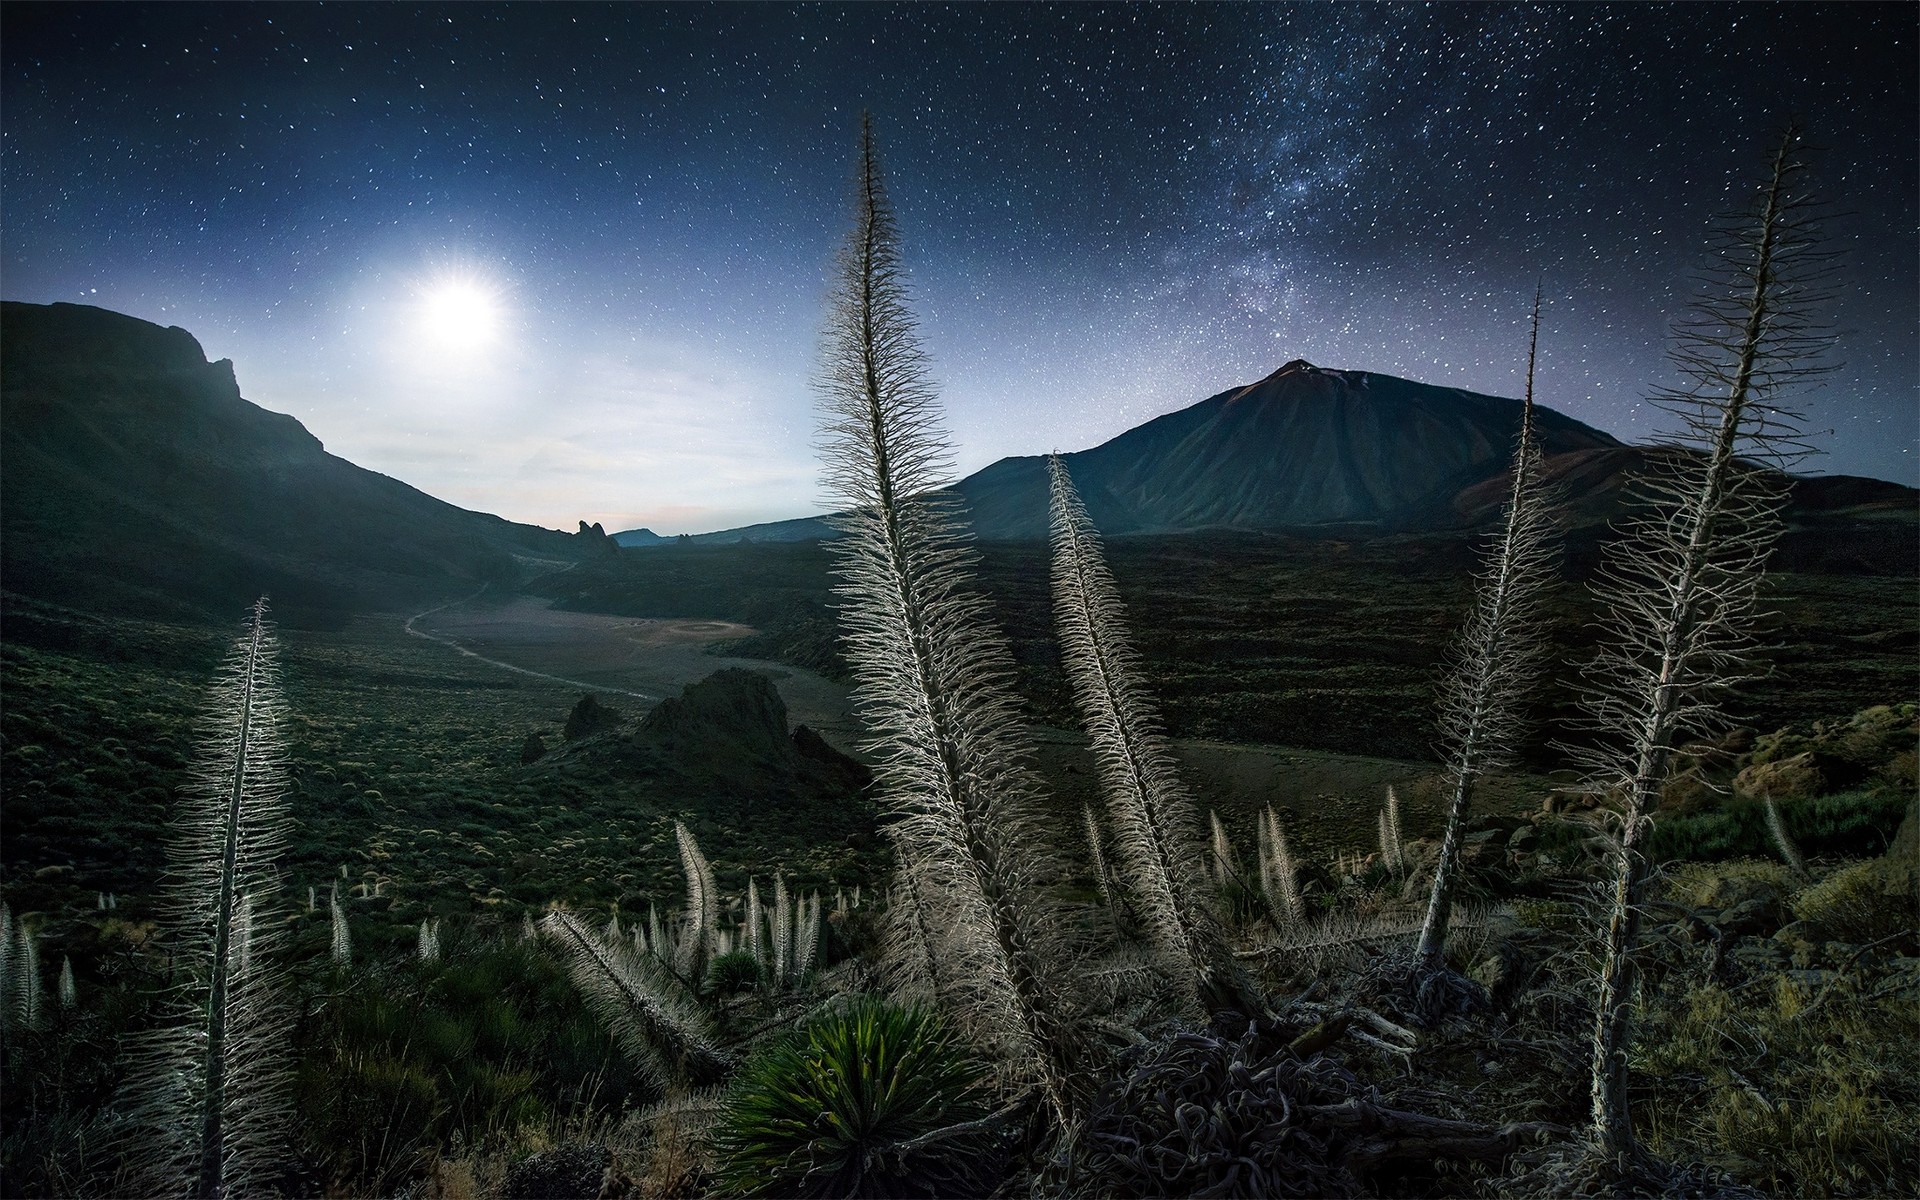 Landscape Nature Mountains Starry Night Moonlight Shrubs Milky Way Spain Tenerife Max Rive 1920x1200